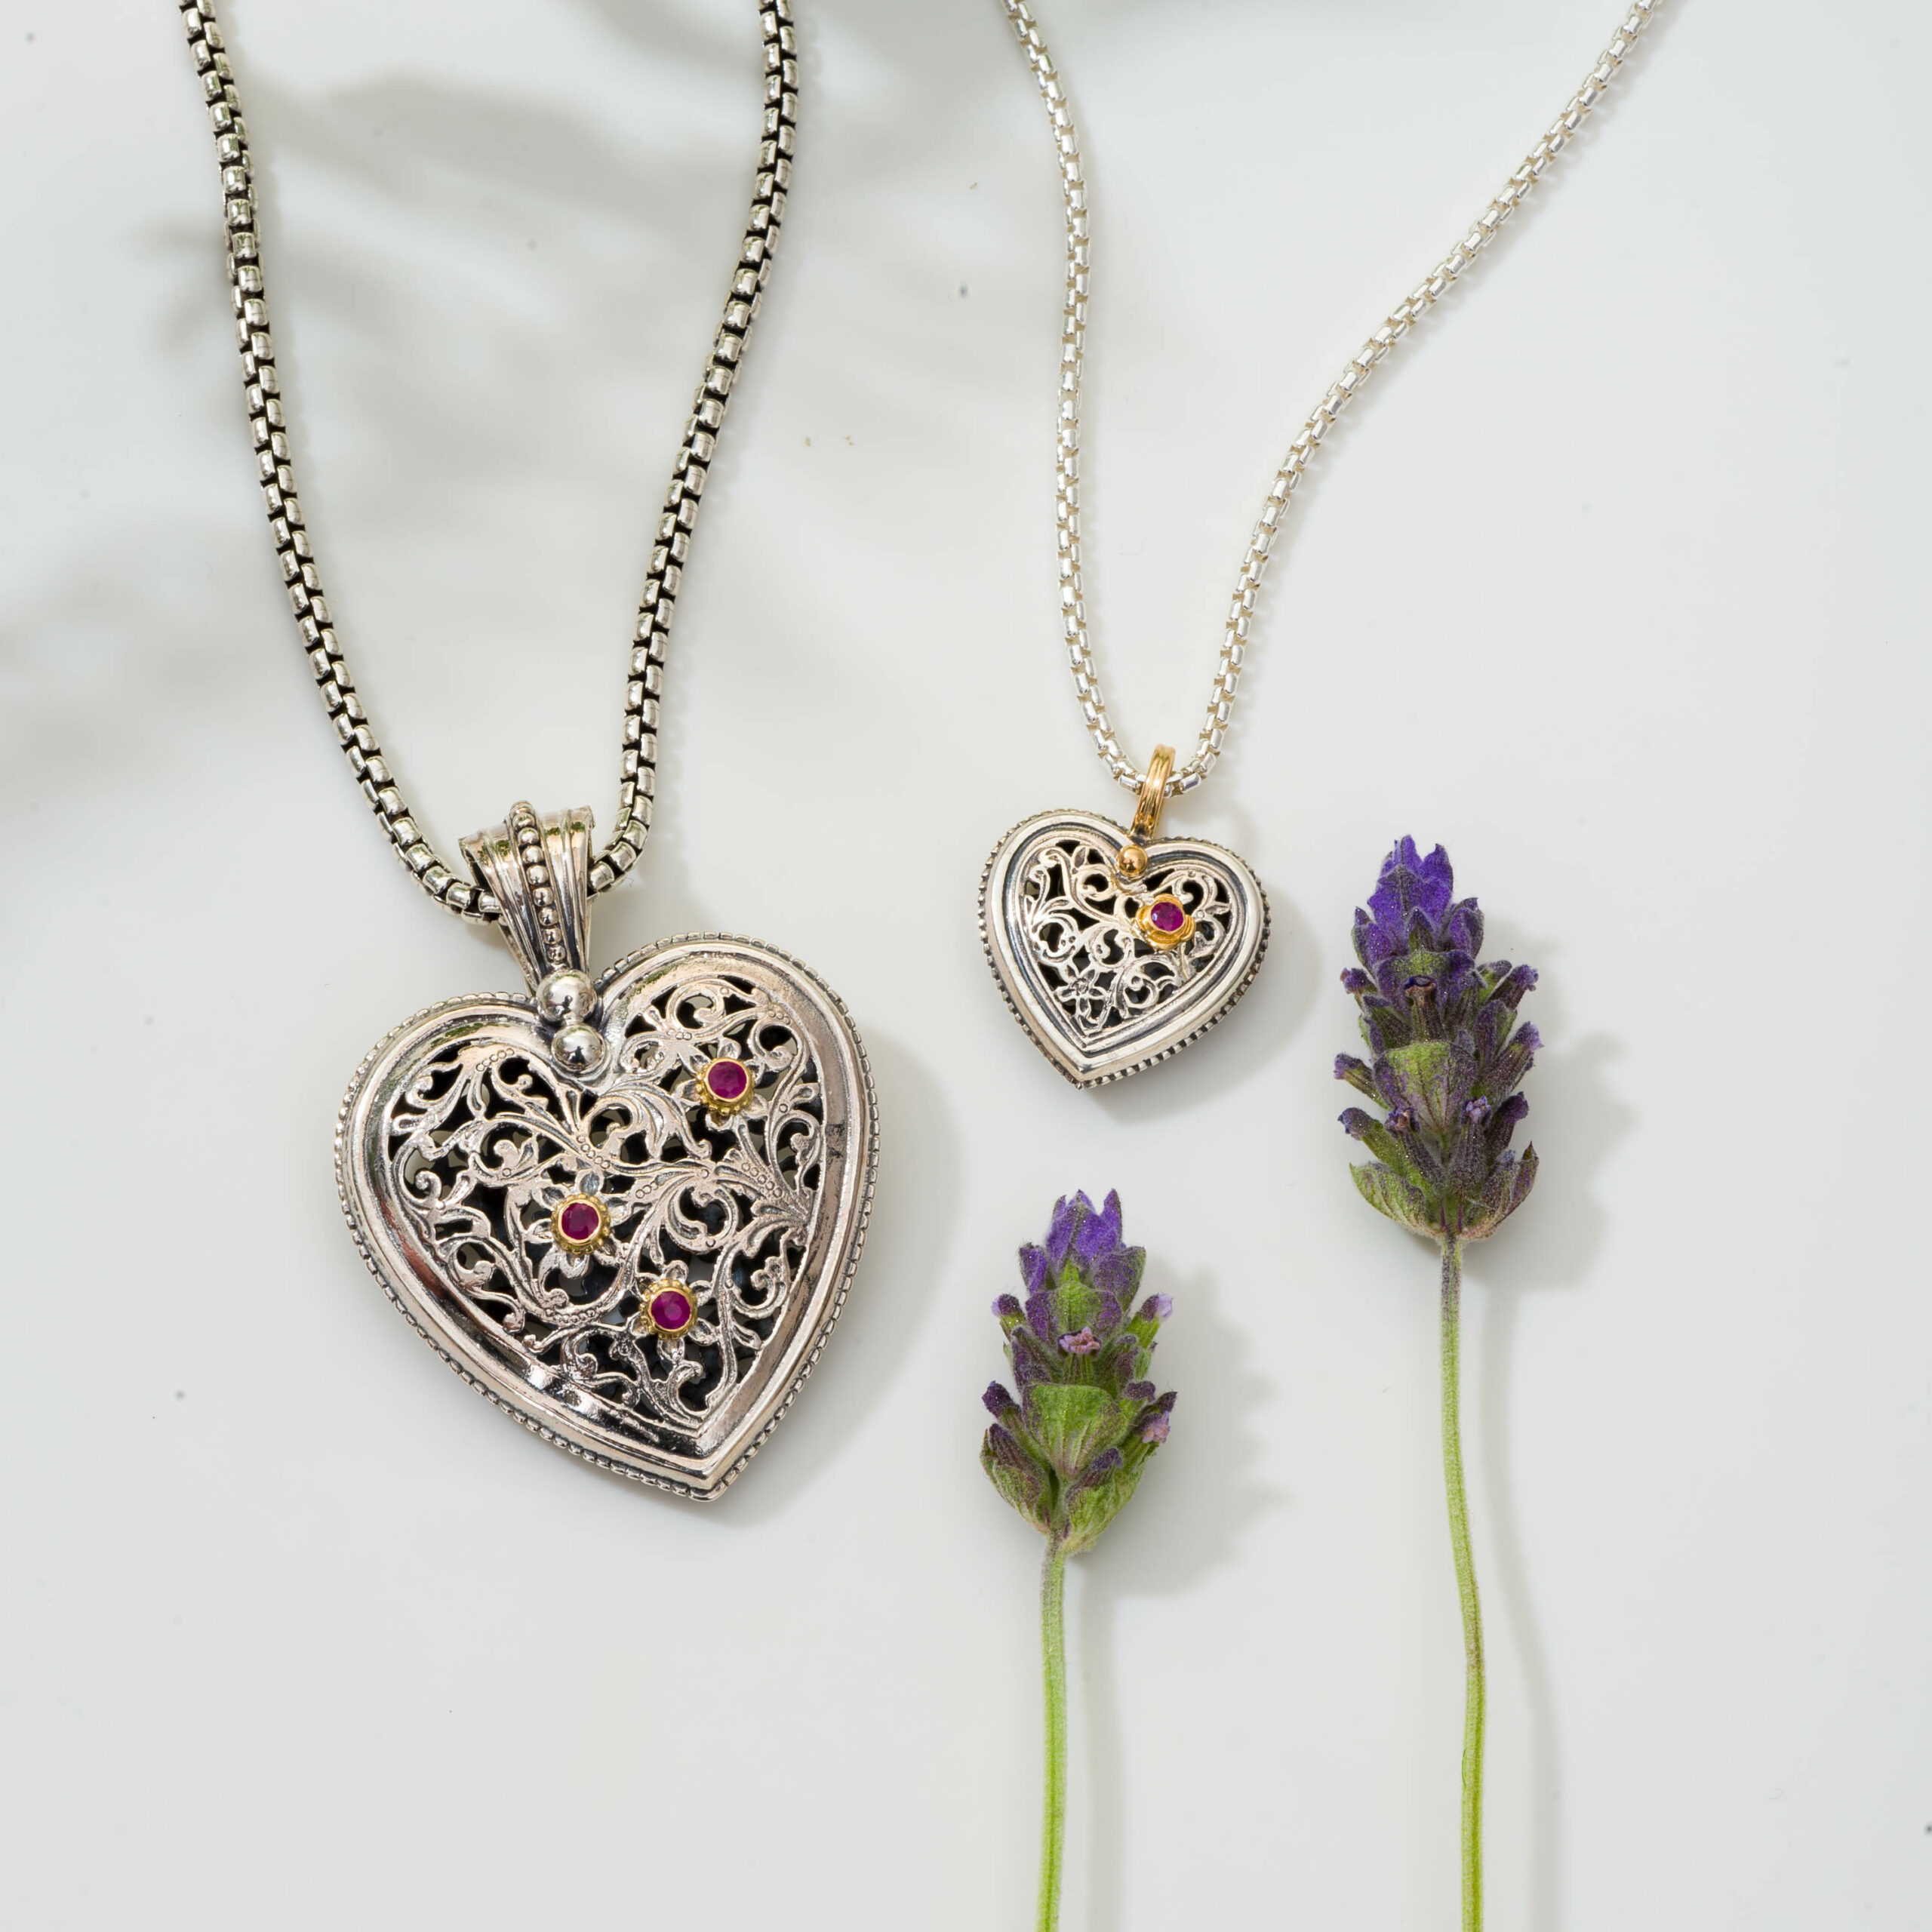 Hearts necklaces Mother and Daughter in 18K solid Yellow Gold, sterling silver and rubies